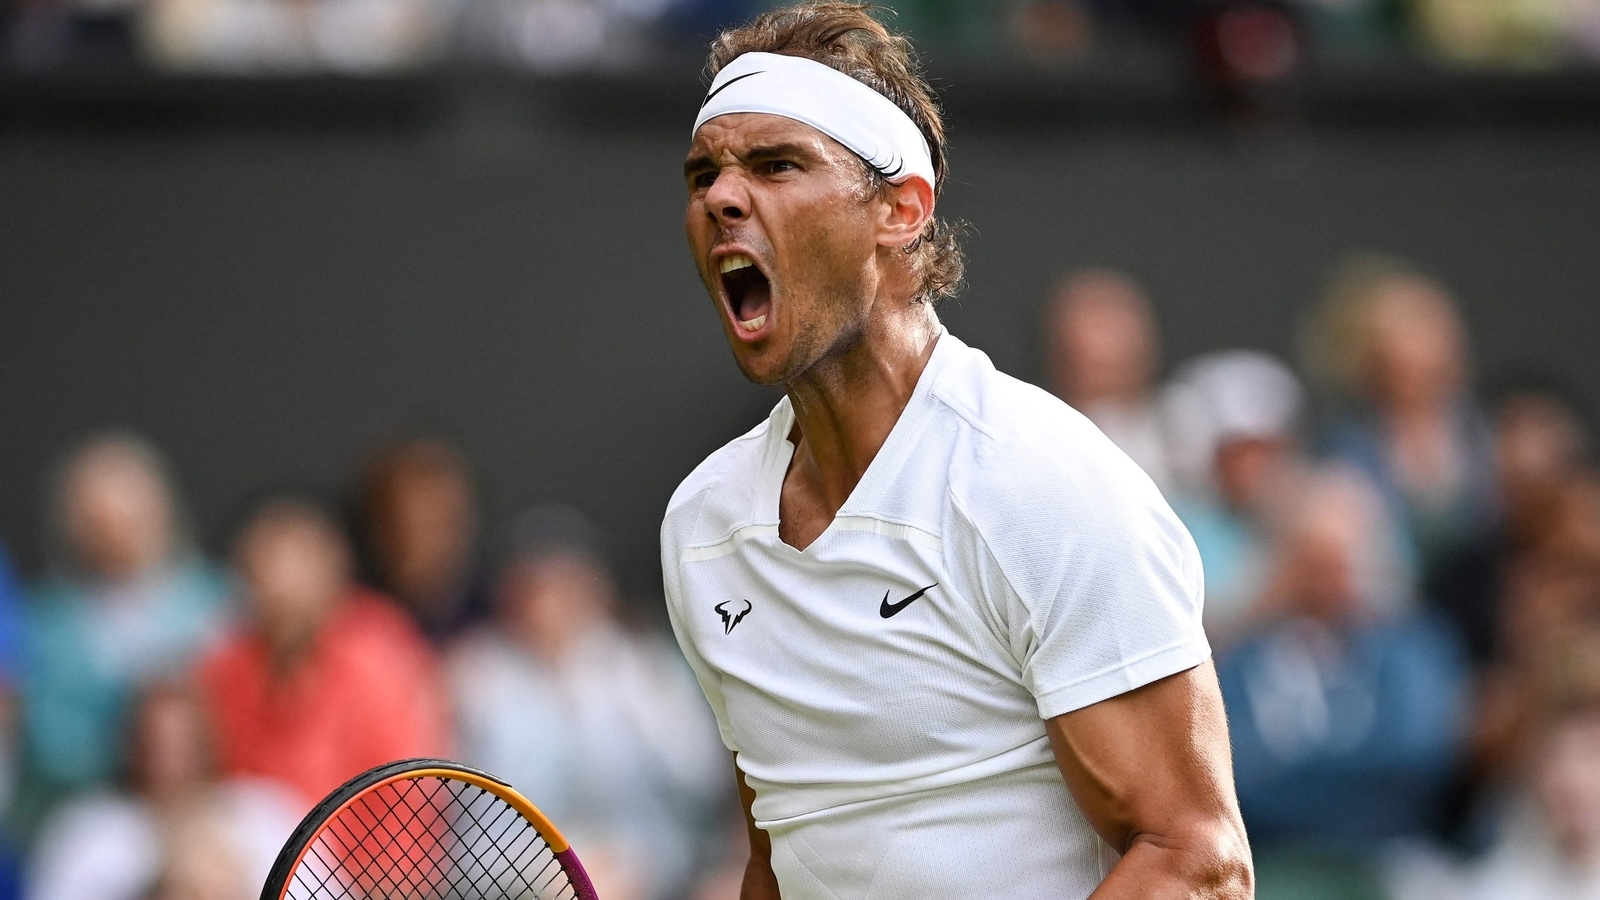 Watch: Fans go berserk seeing Rafael Nadal’s ‘absolutely sensational’ backhand volley during Wimbledon 1st round victory